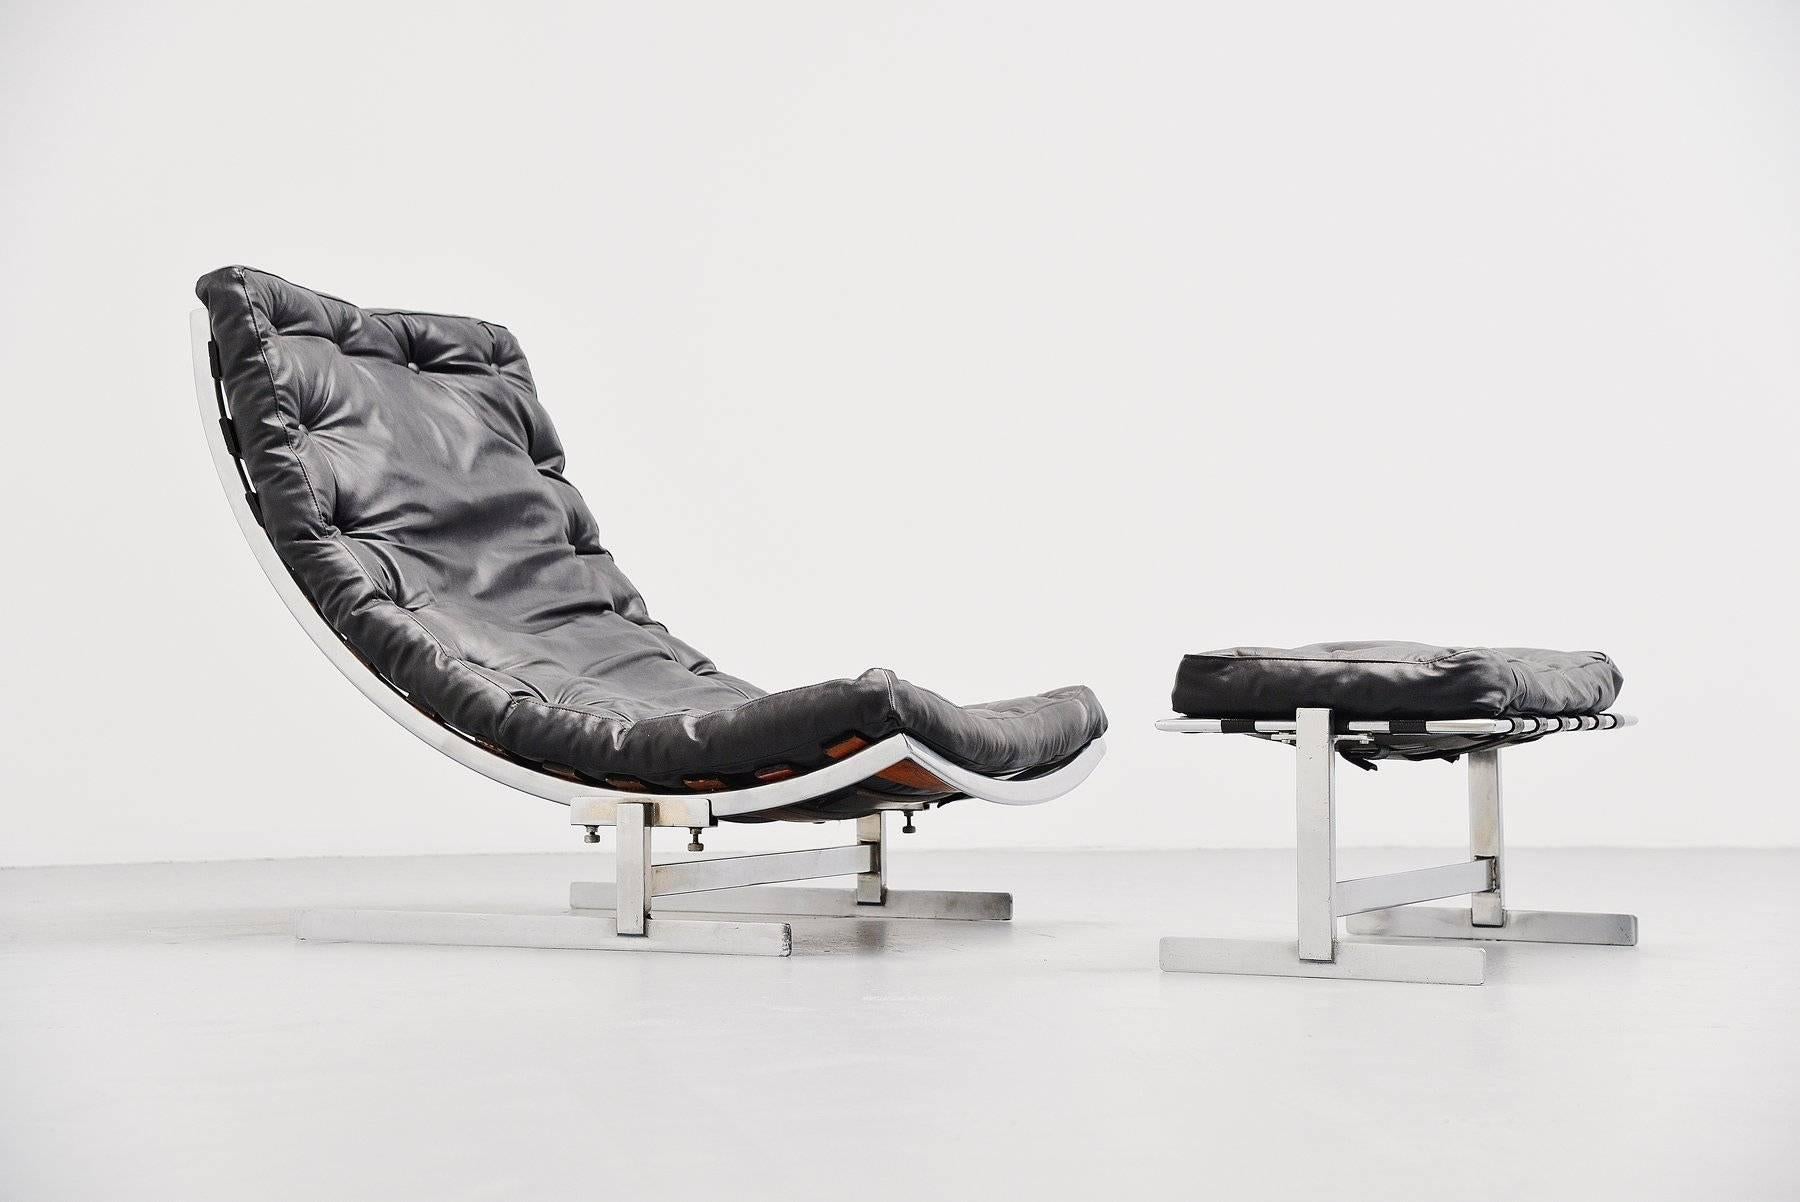 Extraordinary large adjustable lounge chair made by Belgian architect (still in research) Belgium, 1970. This chair has a matte chrome-plated tubular and solid steel frame. The chair is adjustable in height for different lounge positions and its